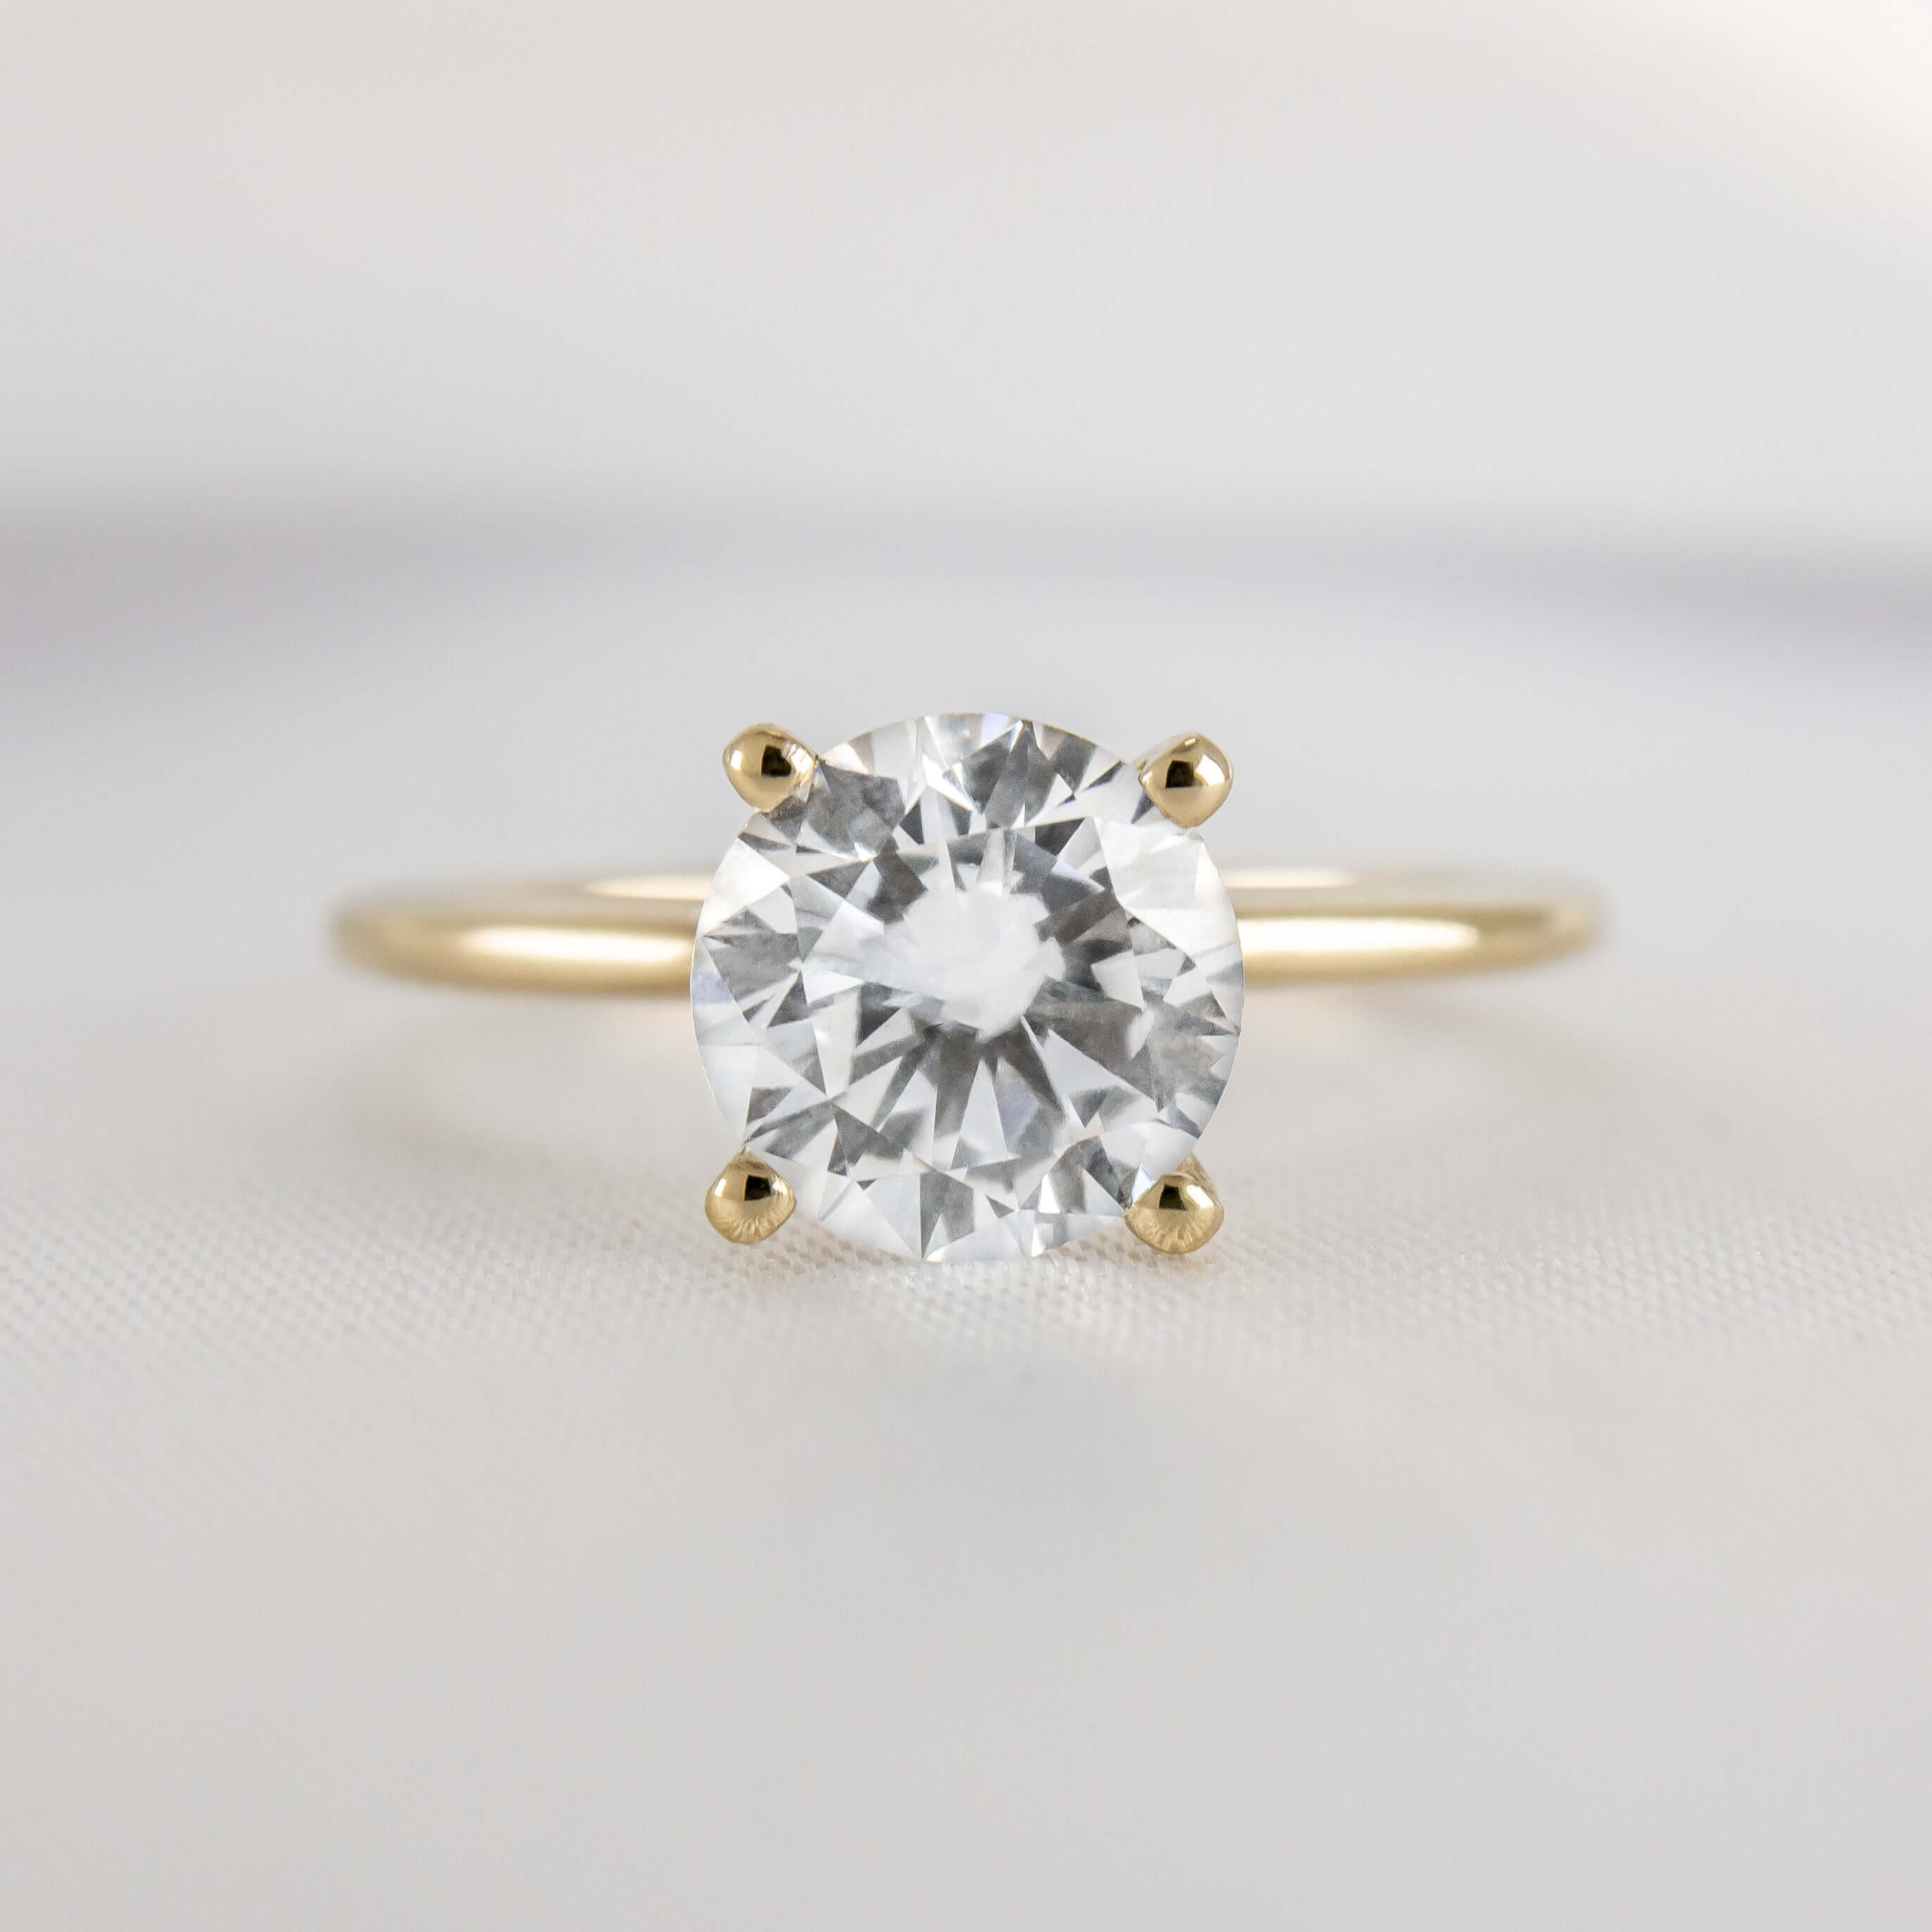 Ethical Sustainable Brooklynn - Bezel Set Accented Engagement Ring with Side Stones - Setting Only 18K Yellow Gold / Lab Grown Diamond Accents